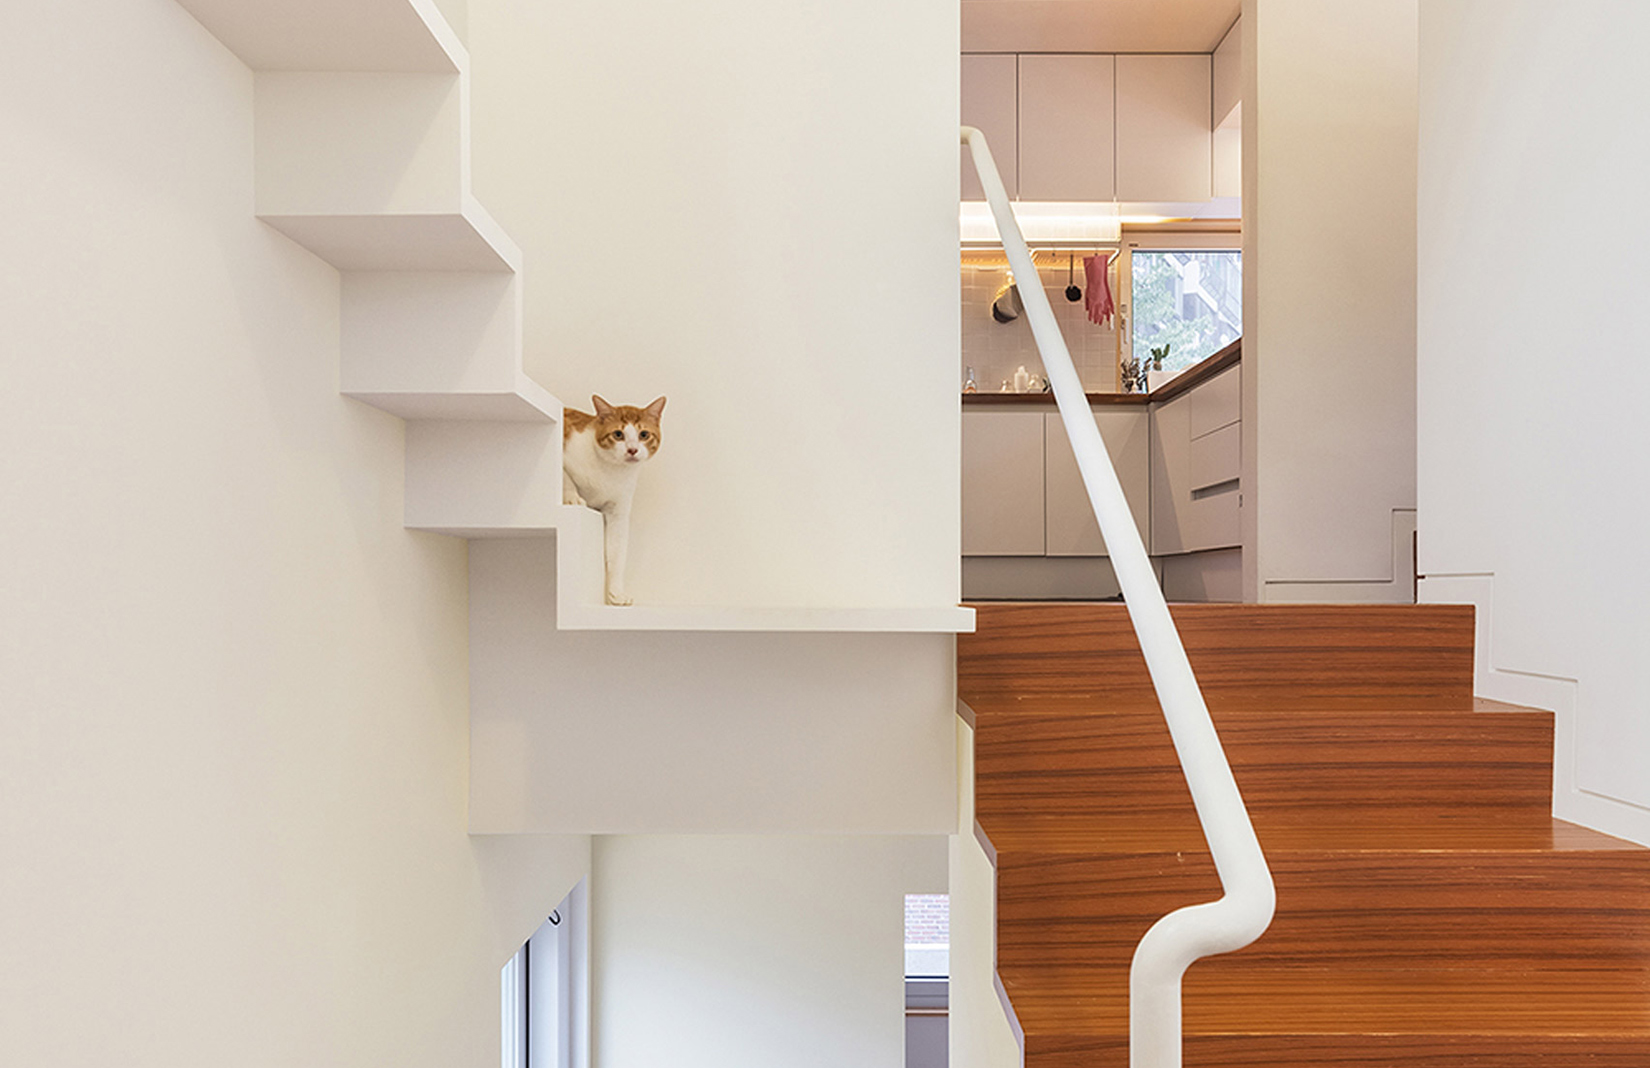 House in Seoul designed for a cat